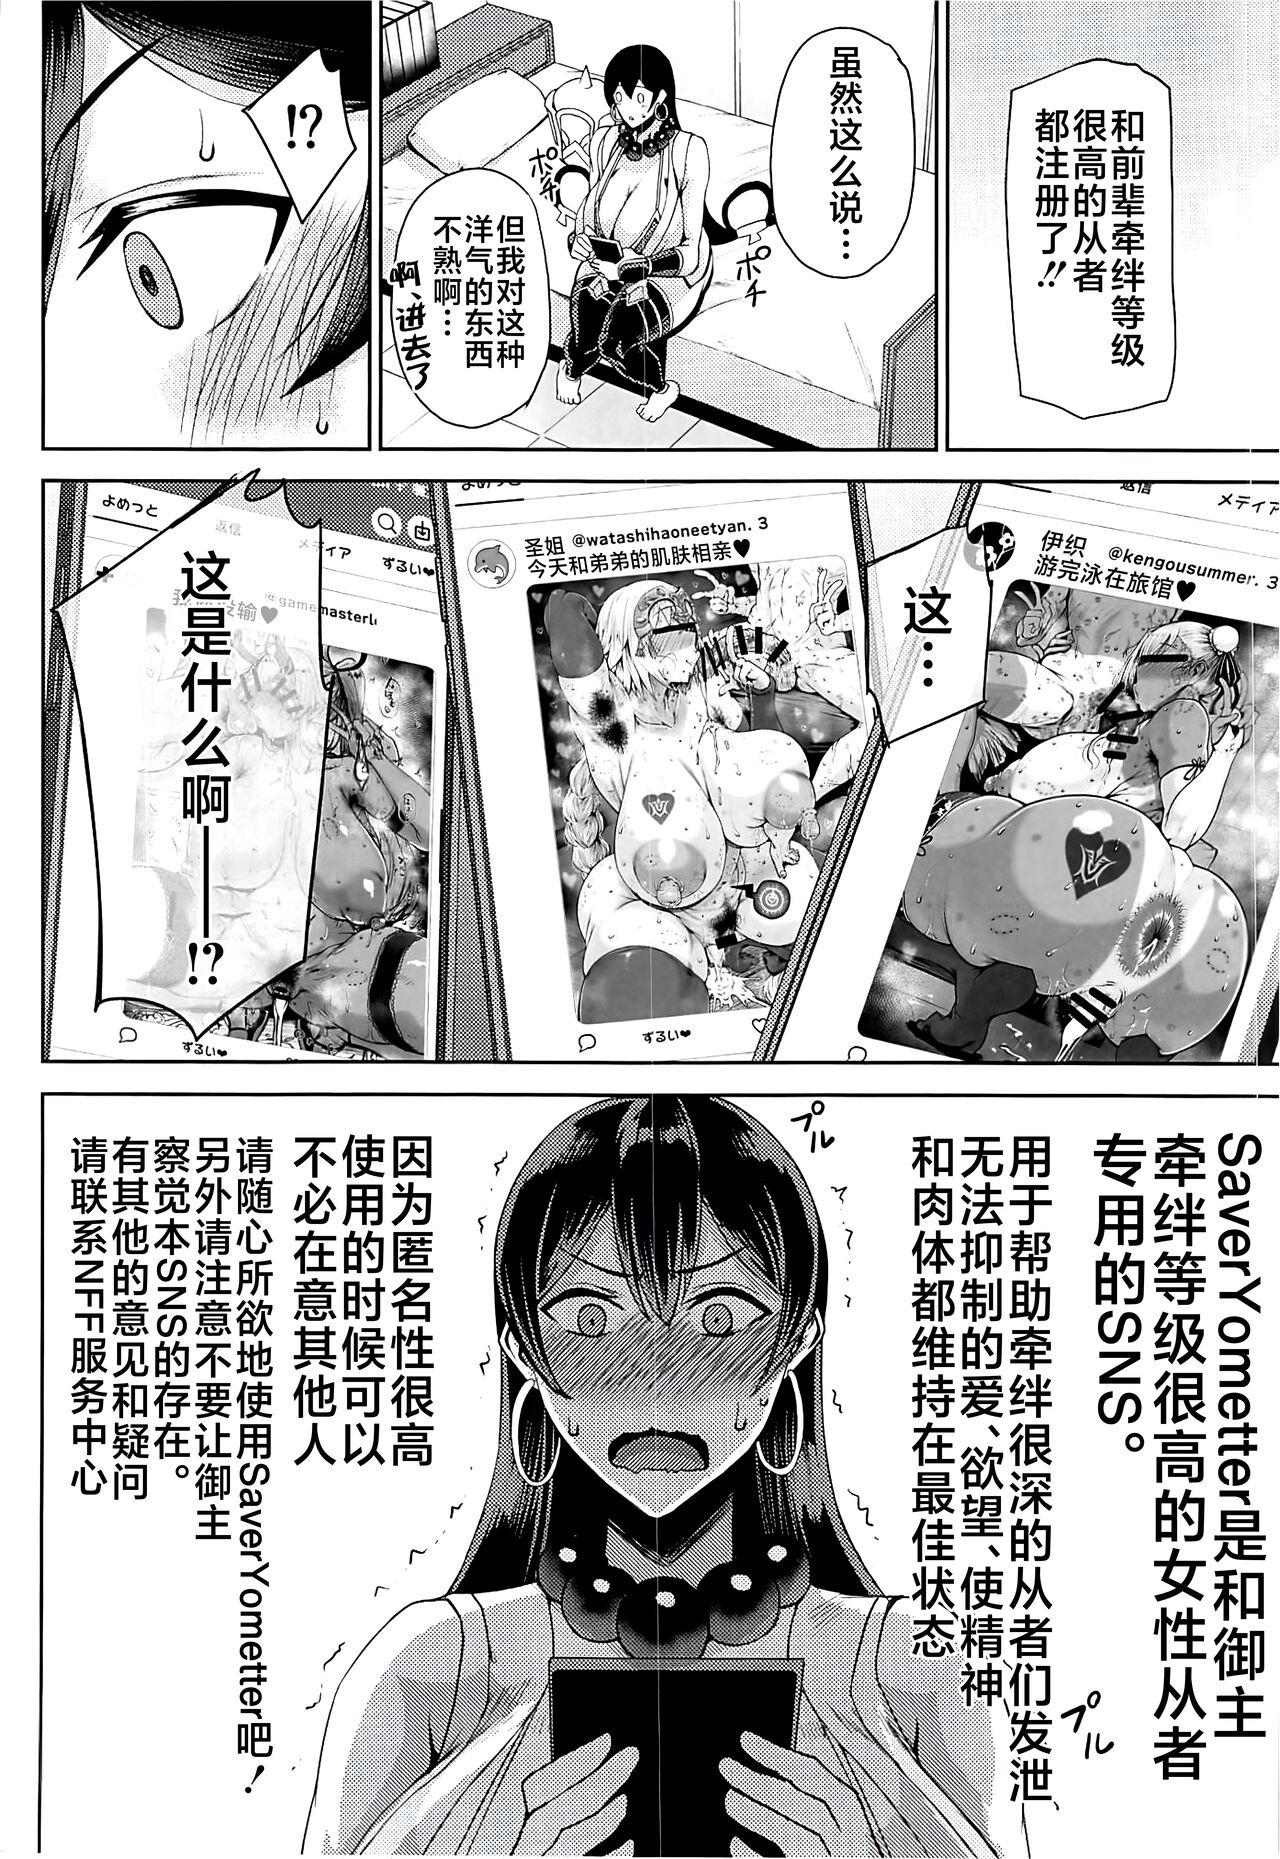 Porra Shugyou Now - Fate grand order Fisting - Page 3